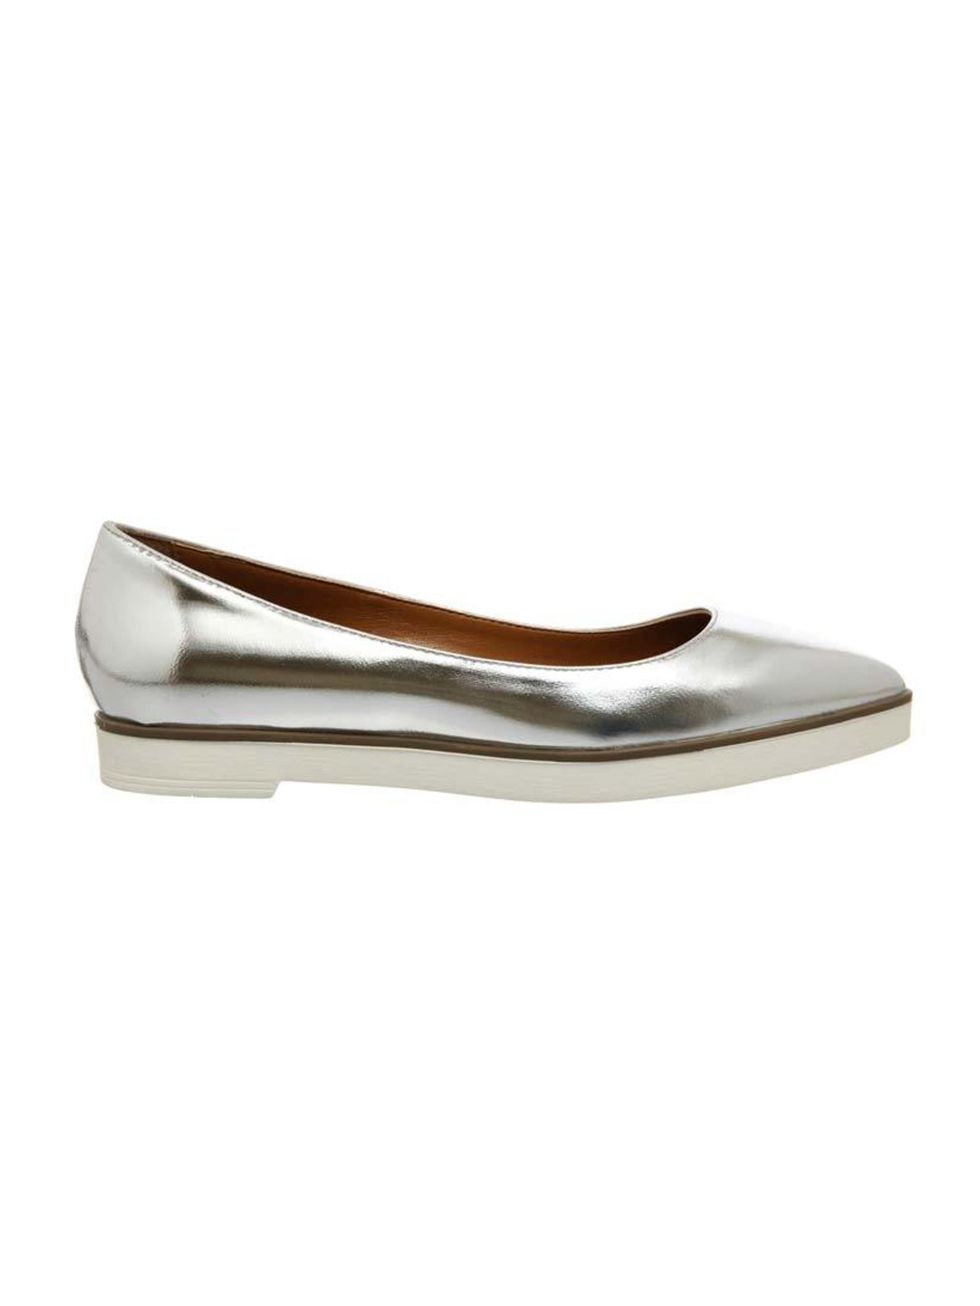 <p>Silver flats are fast becoming a staple buy, and this chunky-soled pair tops our list.</p>

<p><a href="http://www.office.co.uk/view/product/office_catalog/2,30/2151492340" target="_blank">Office</a> shoes, £50</p>